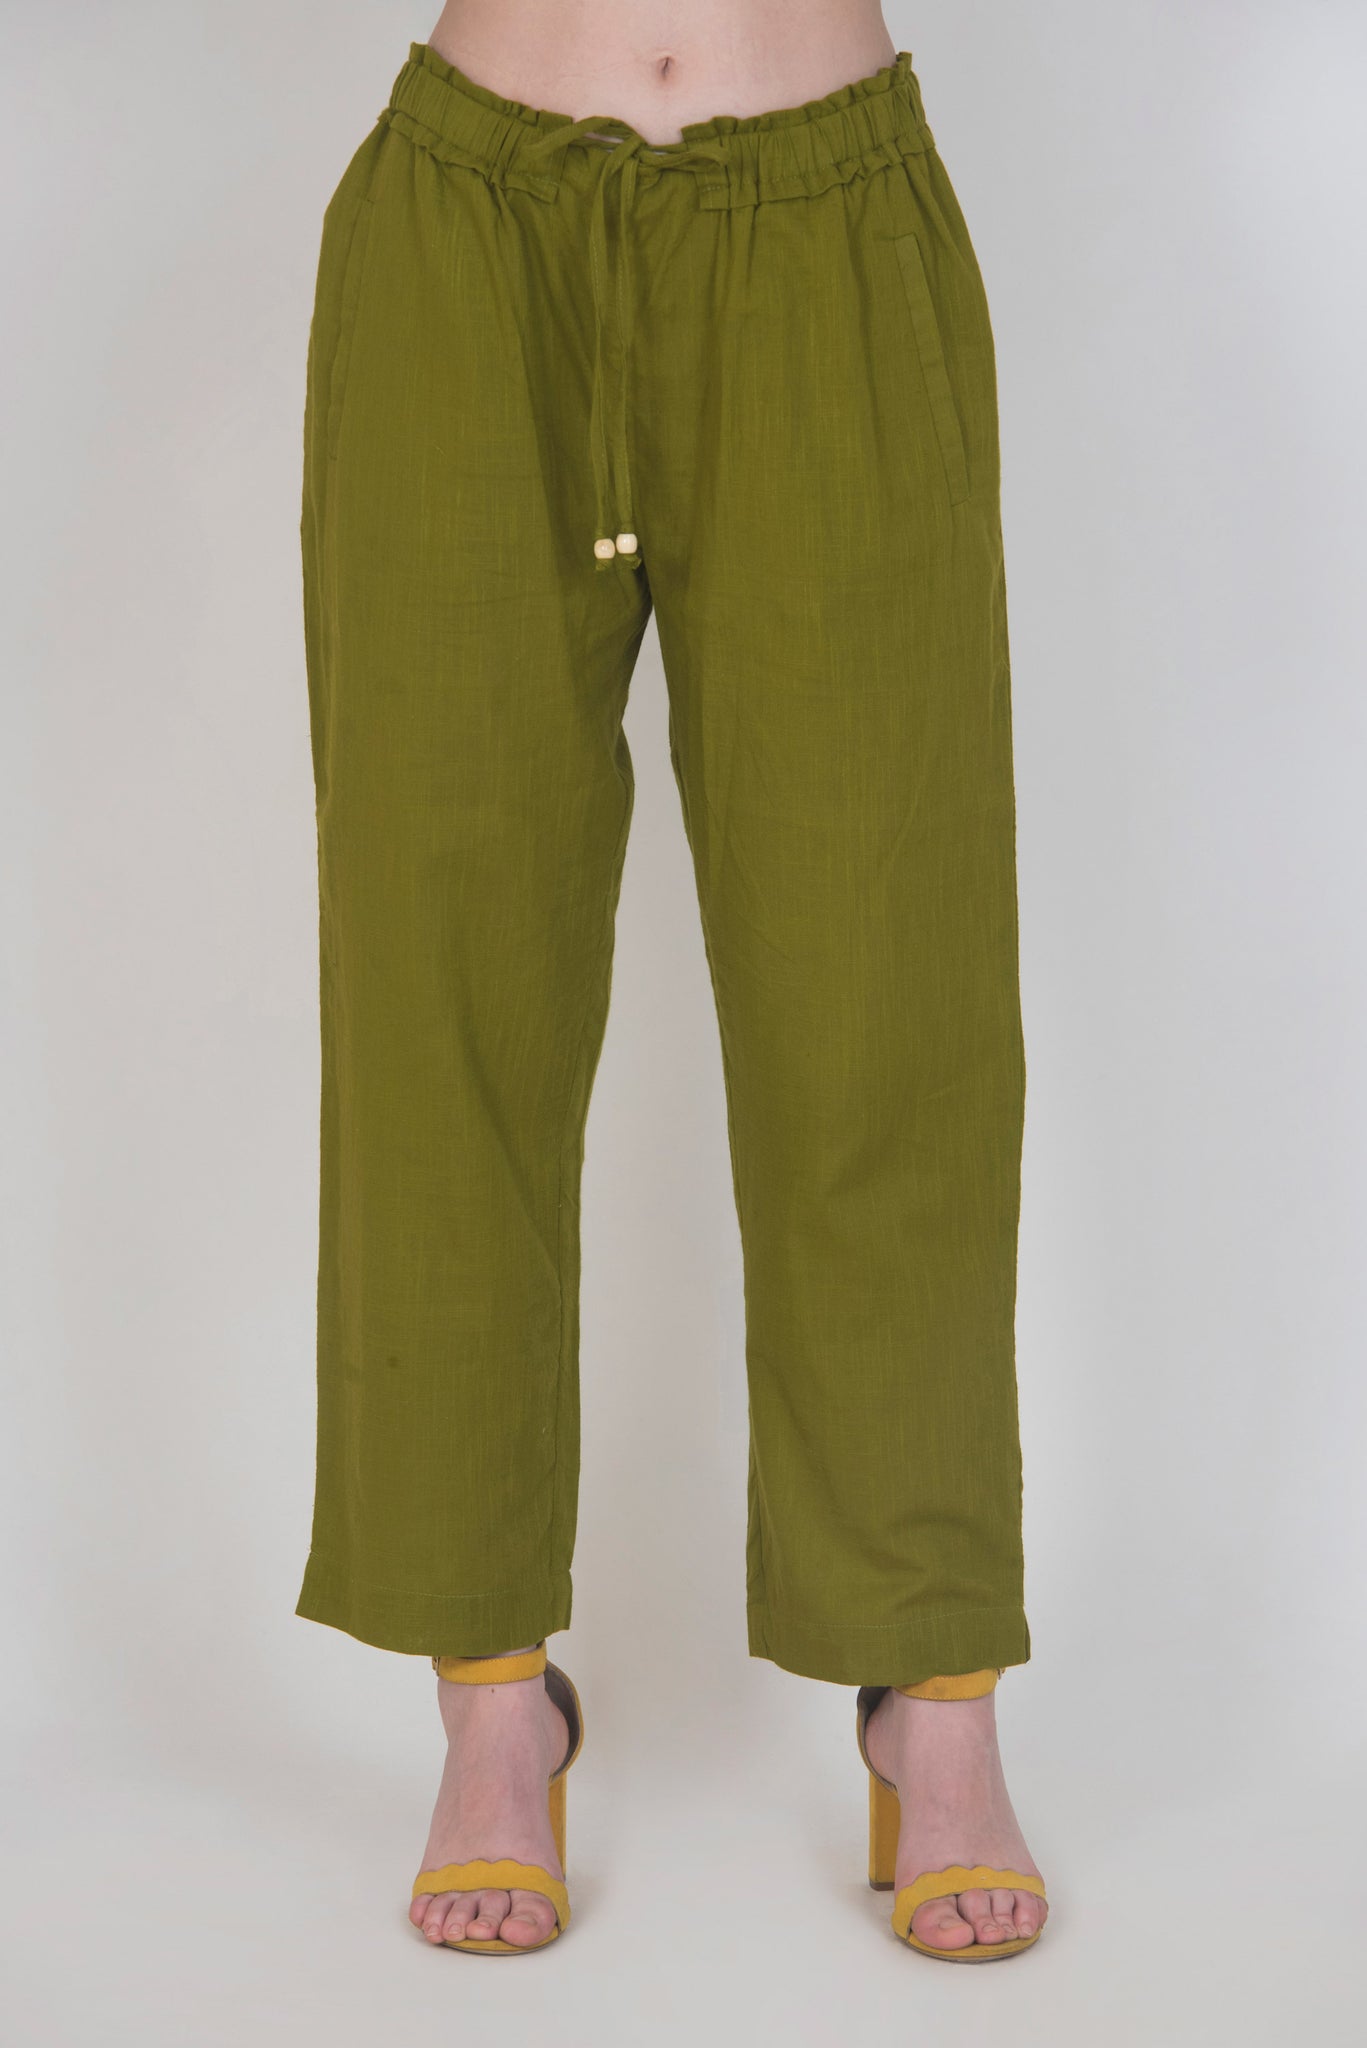 Olive Green Solid Pants with pocket